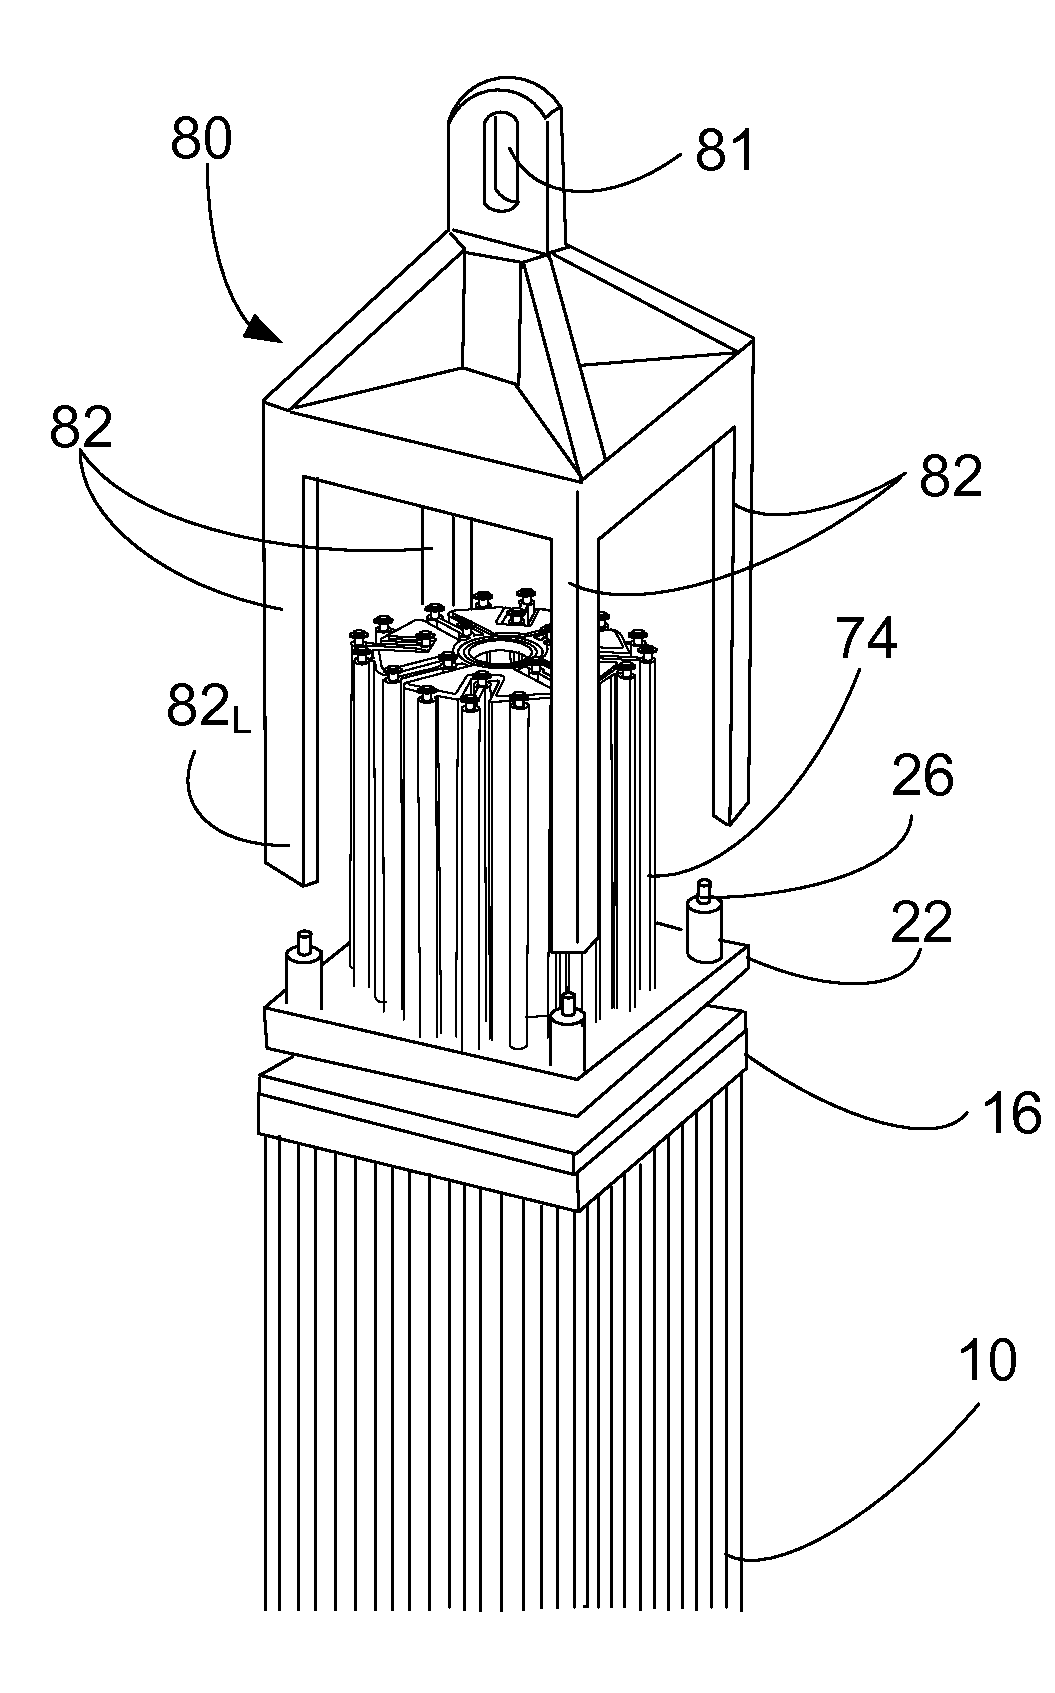 Nuclear reactor refueling methods and apparatuses